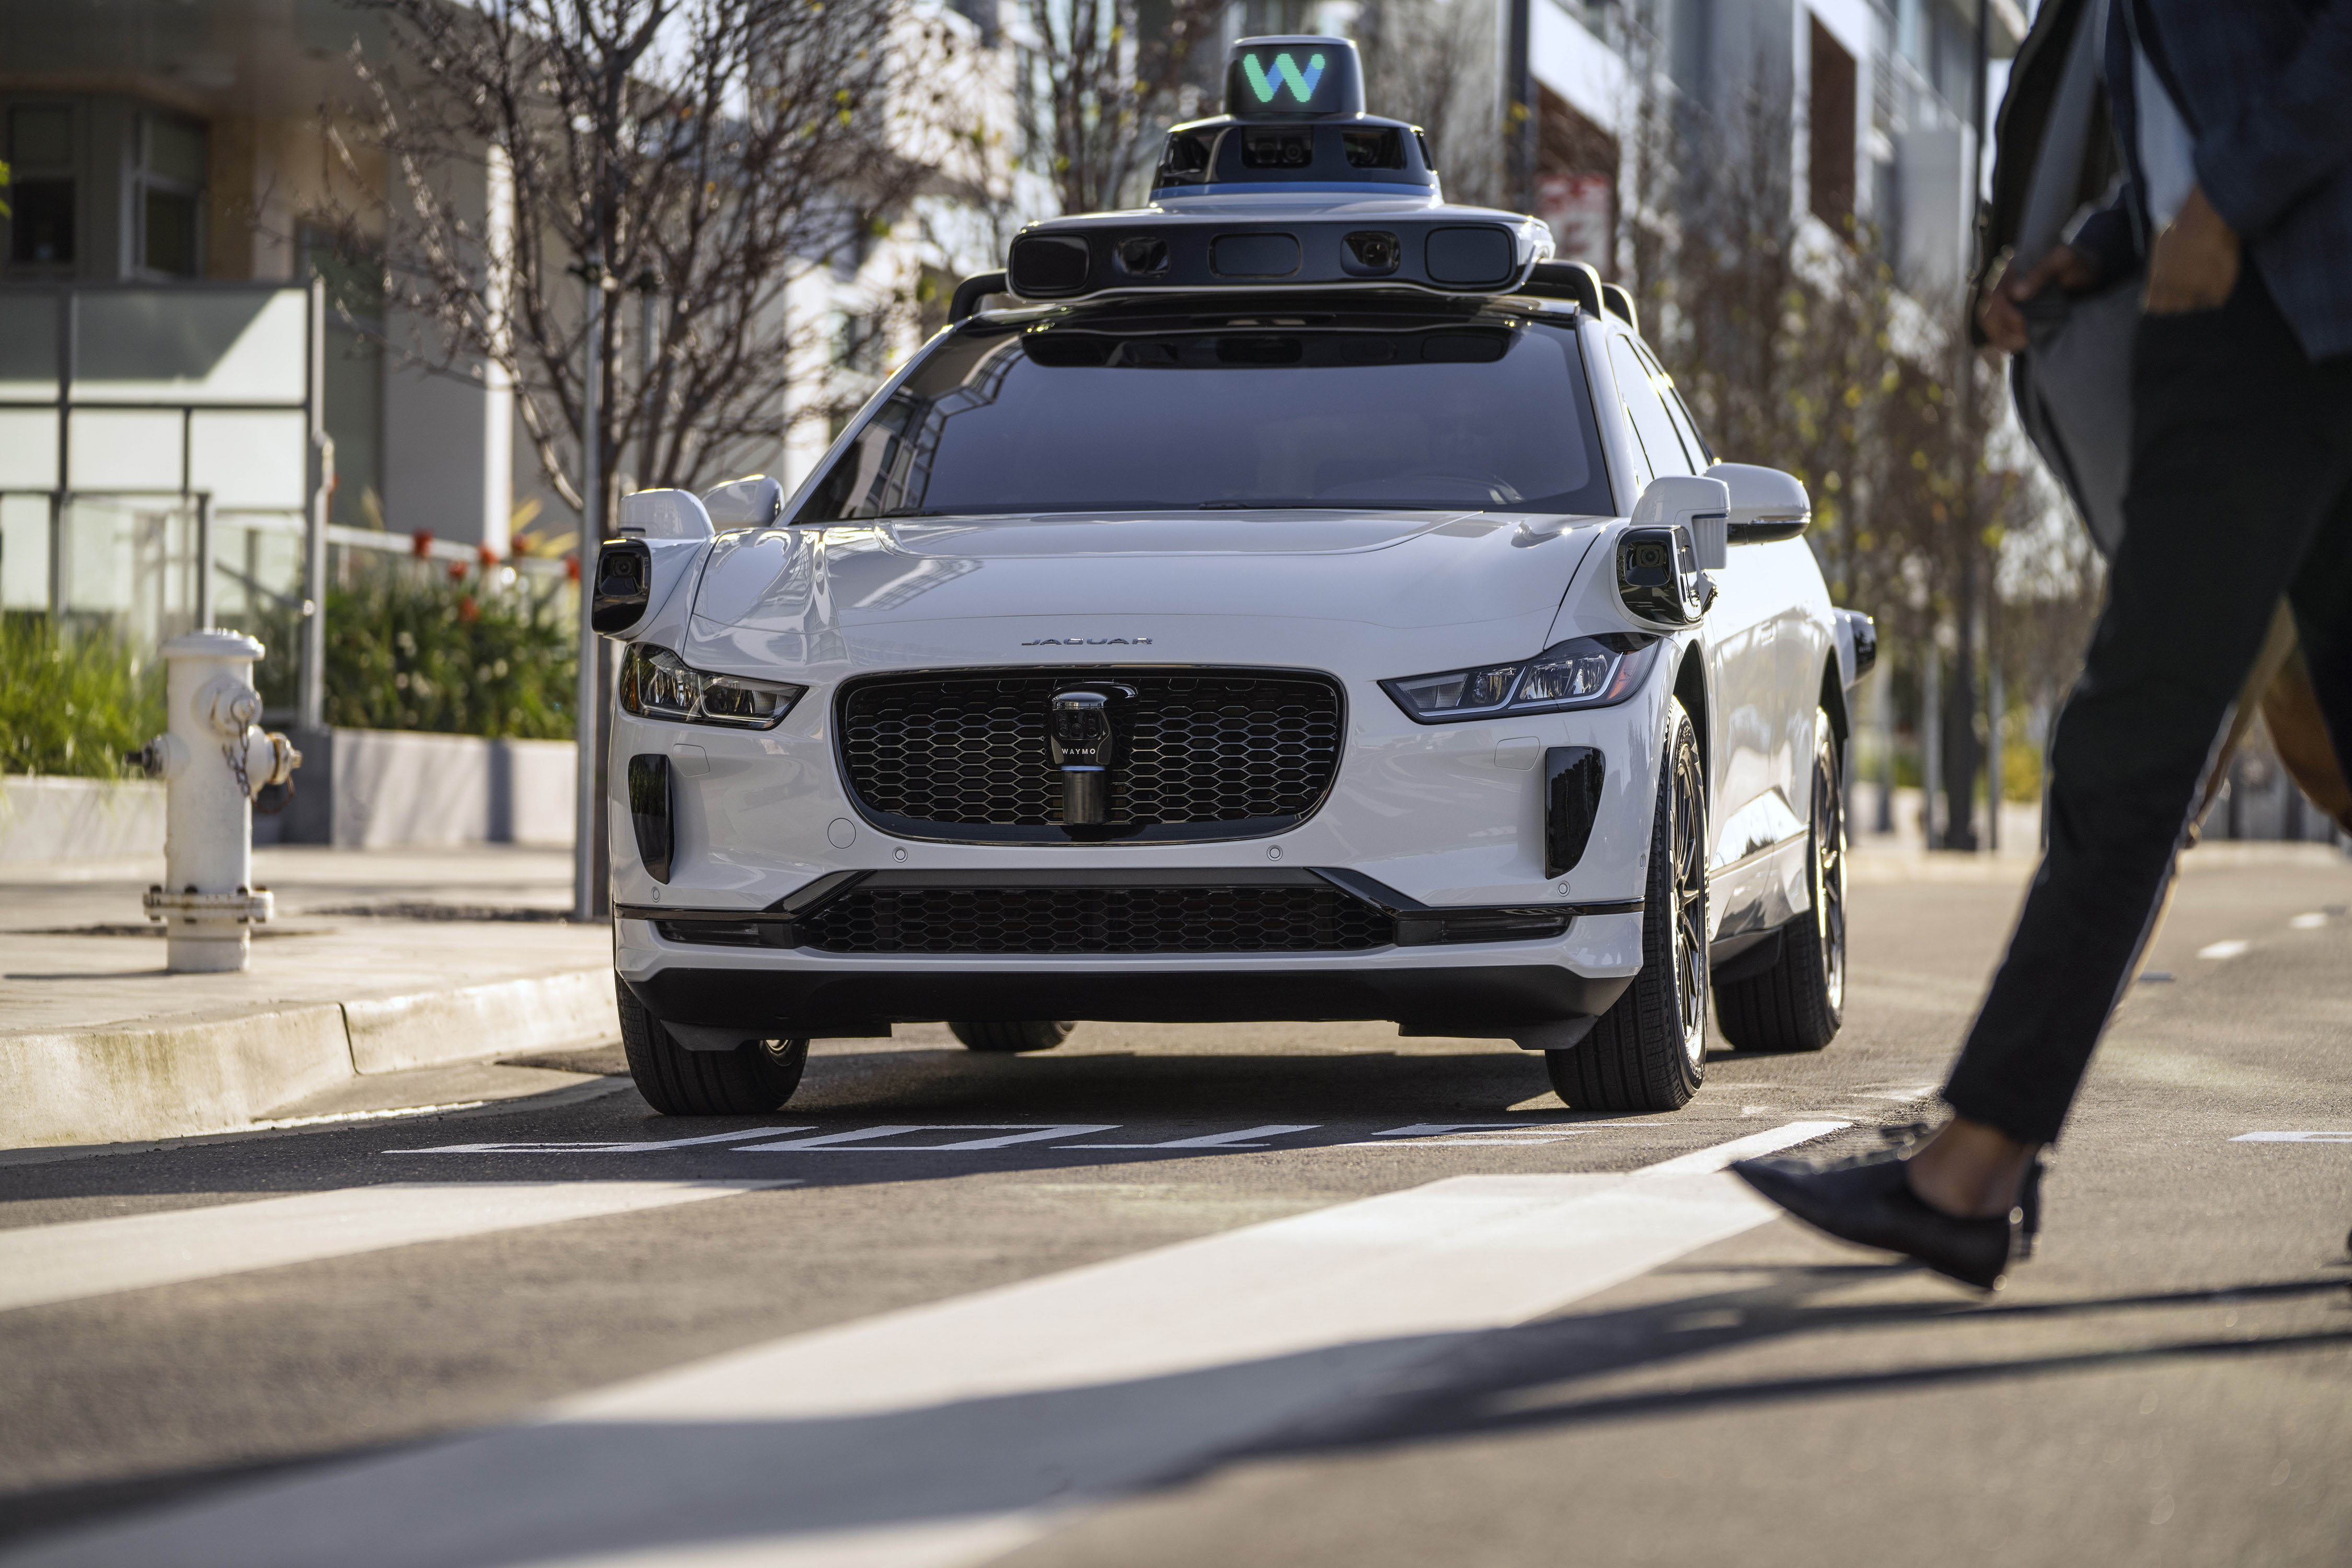 Waymo drone involved in an accident with a cyclist in San Francisco